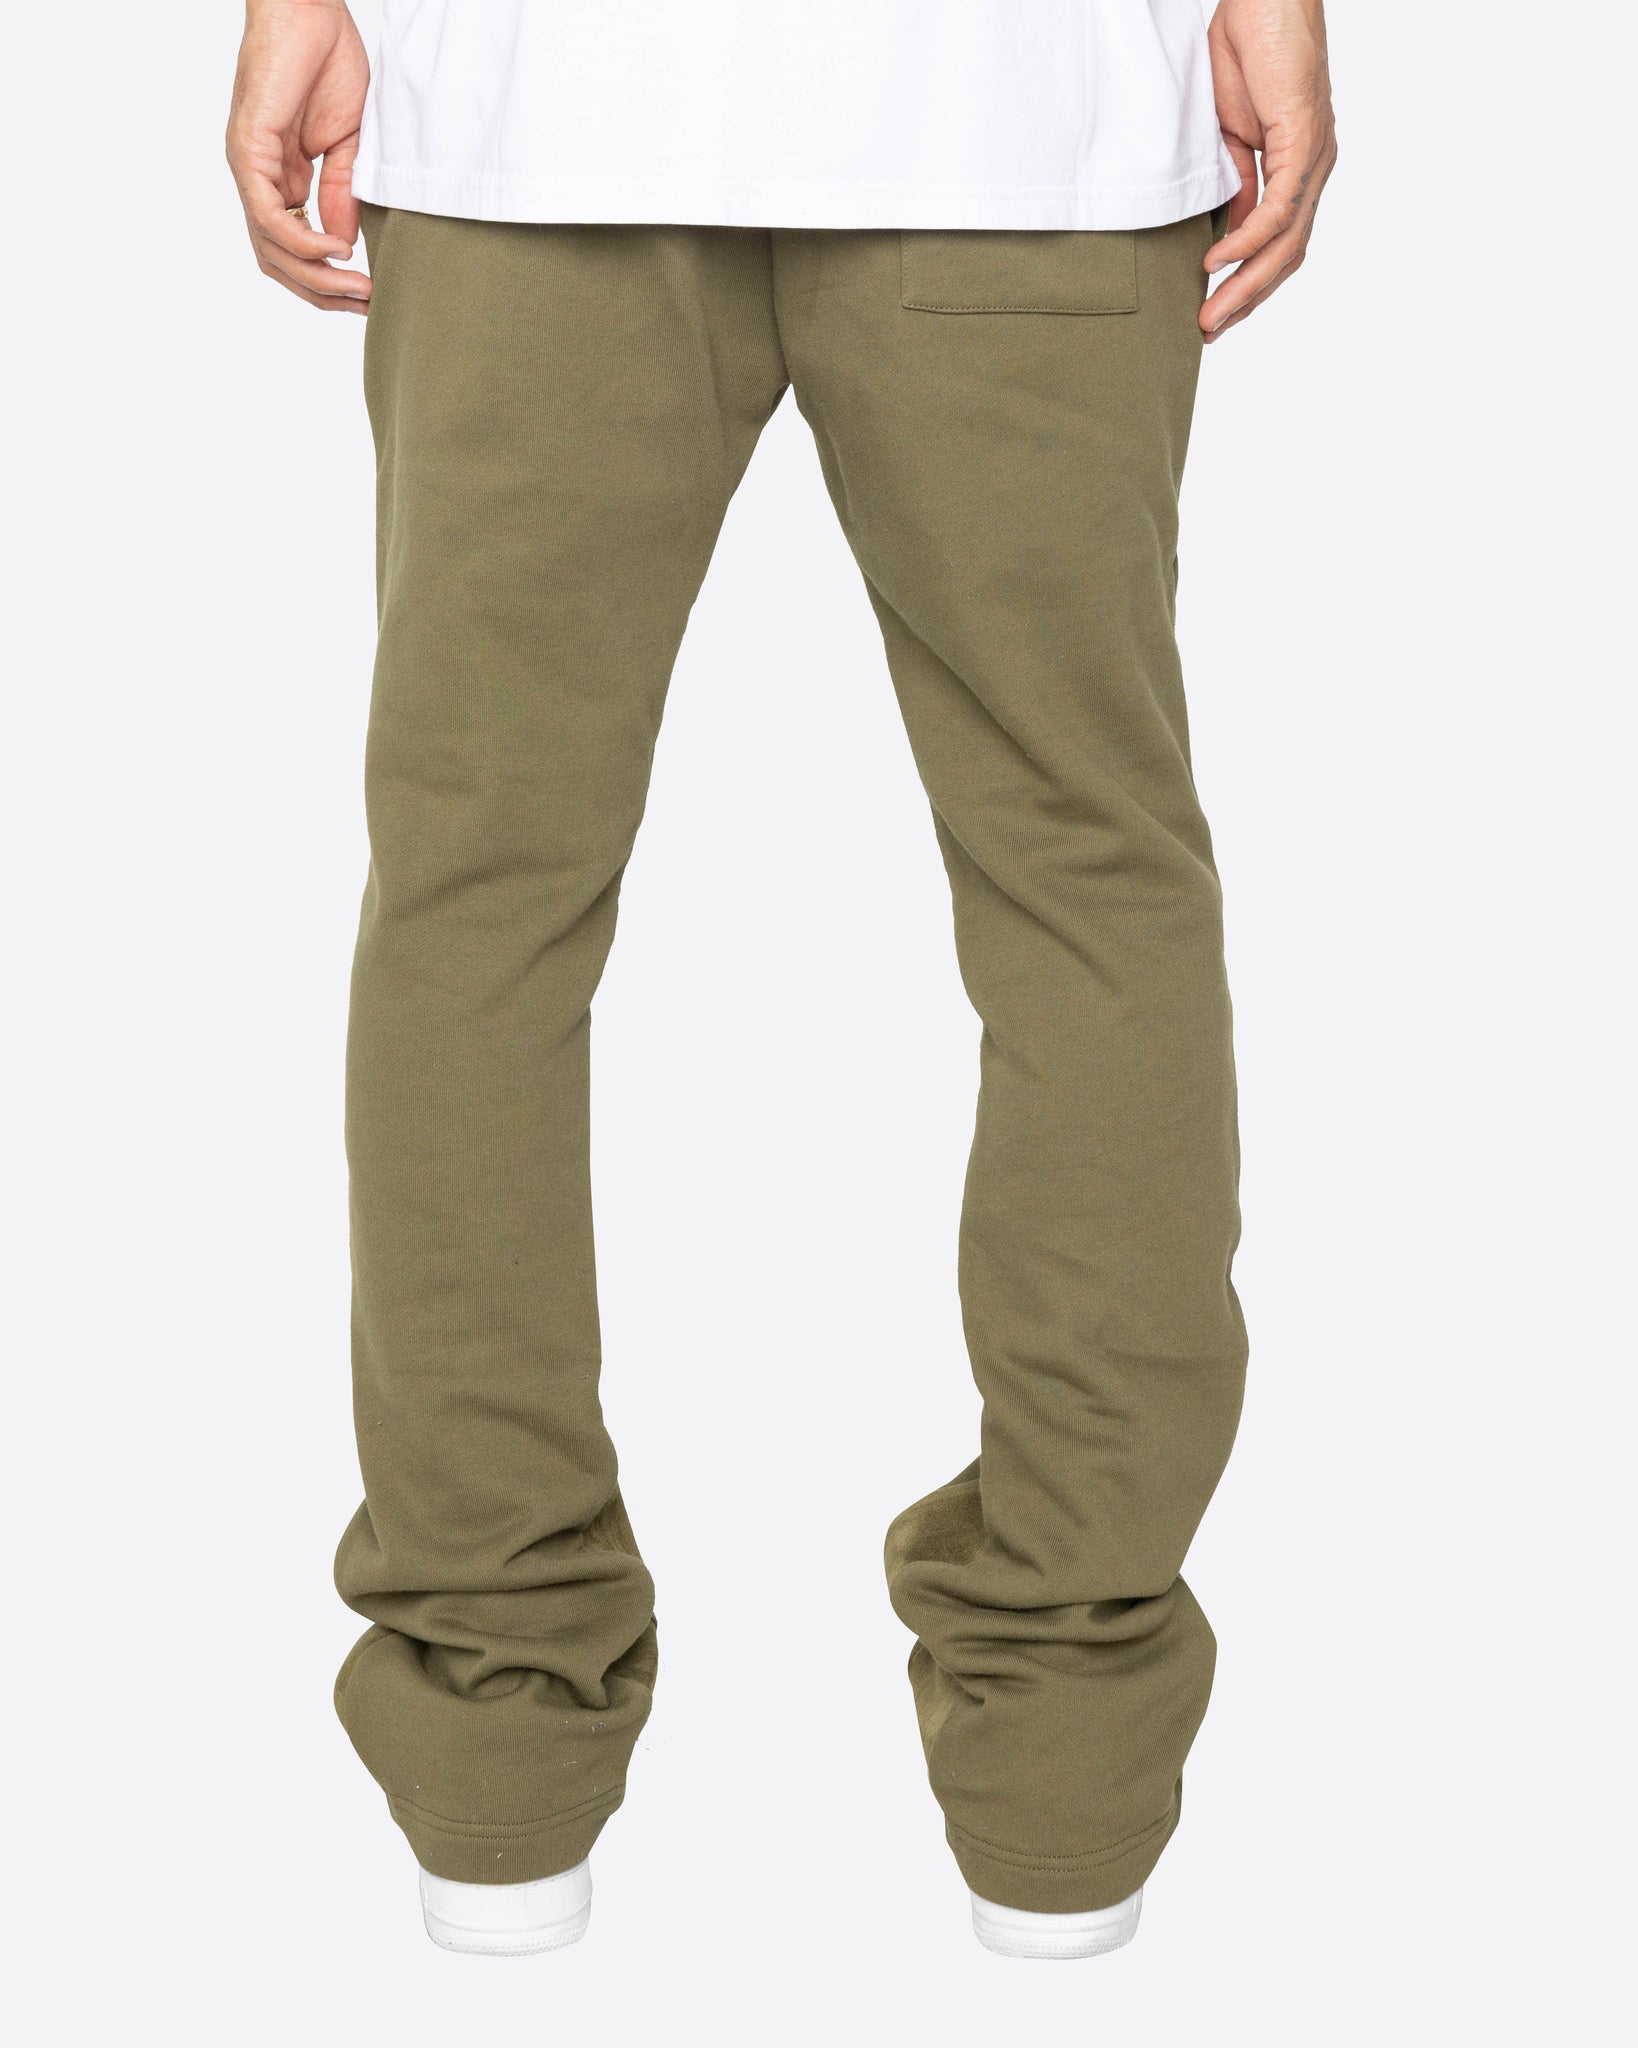 EPTM CLUBHOUSE PANTS - OLIVE